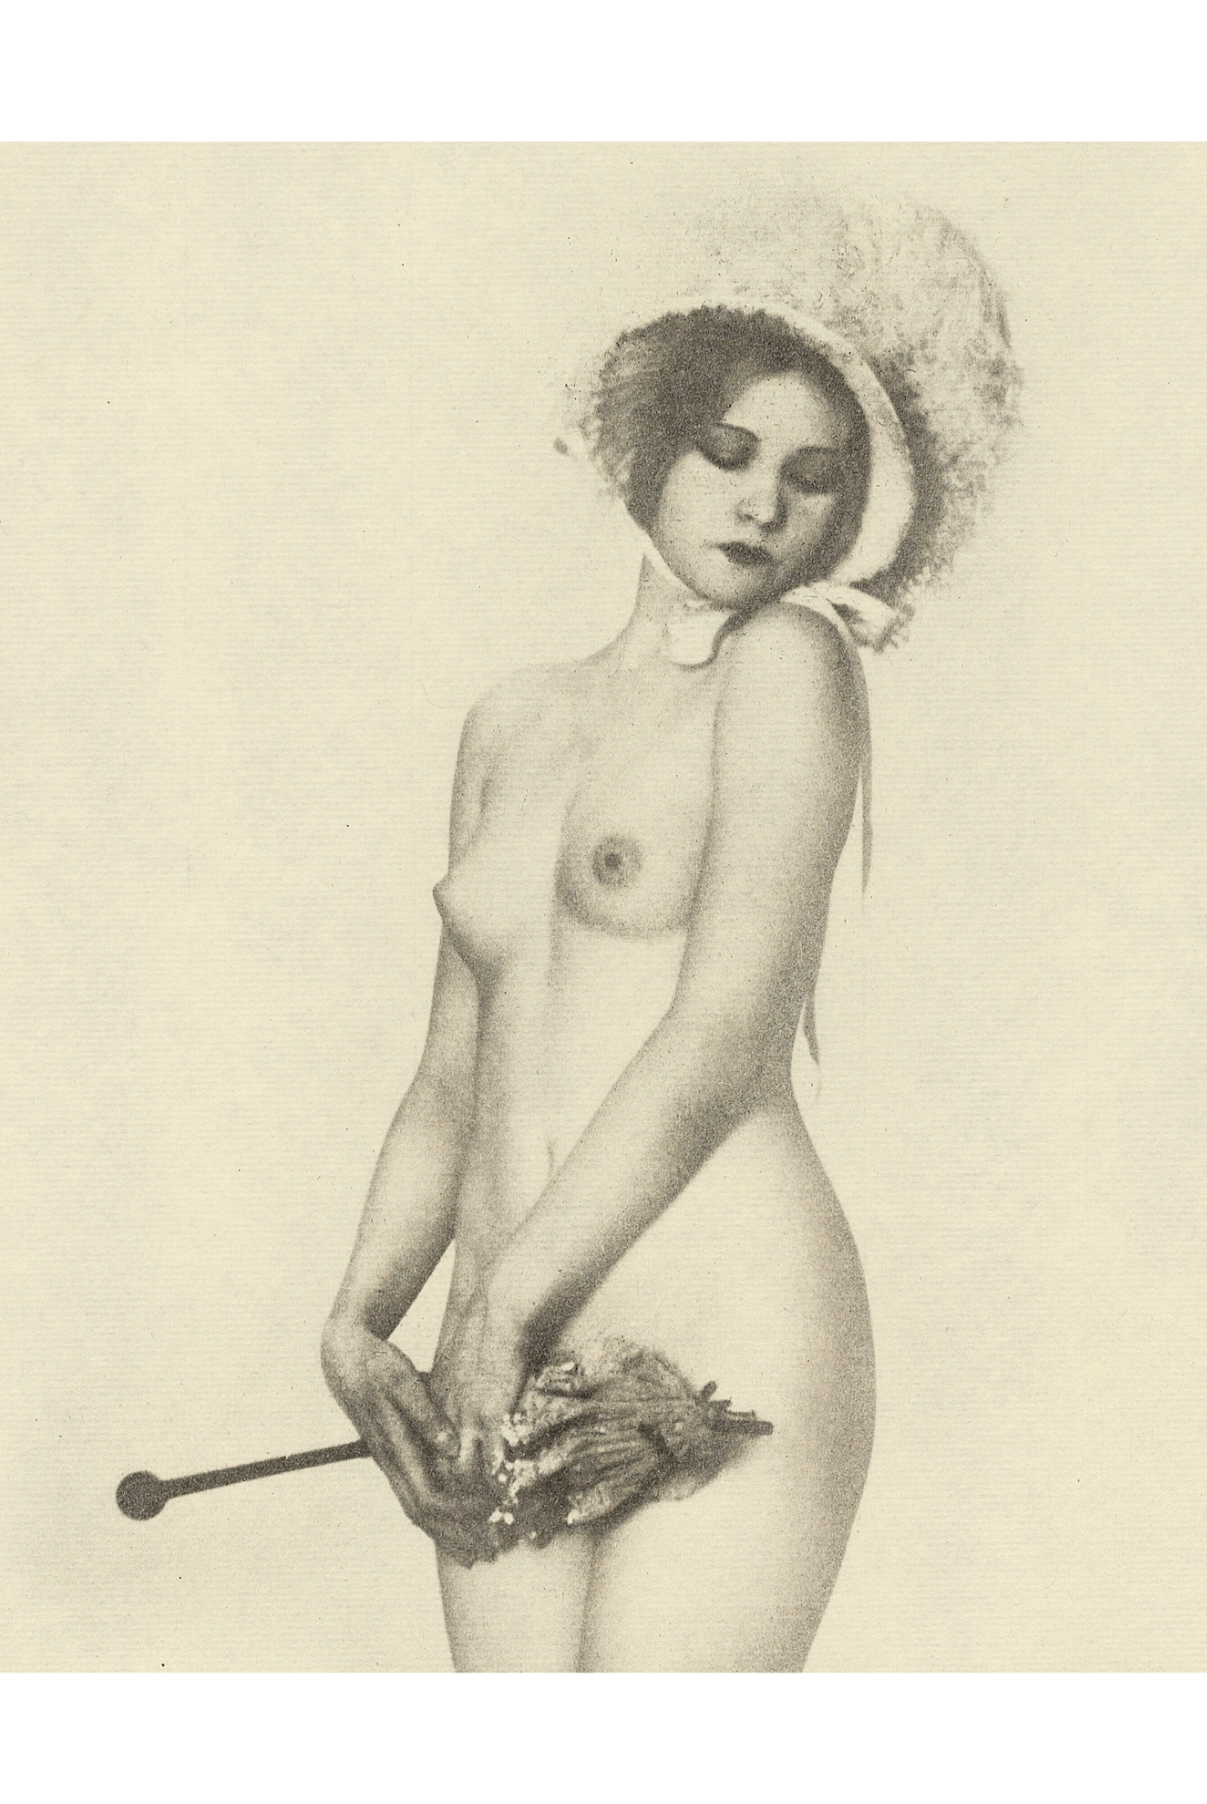 Nude Woman Wearing Bonnet and Holding a Parasol by Arthur F. Kales - c.1920 - Postcard